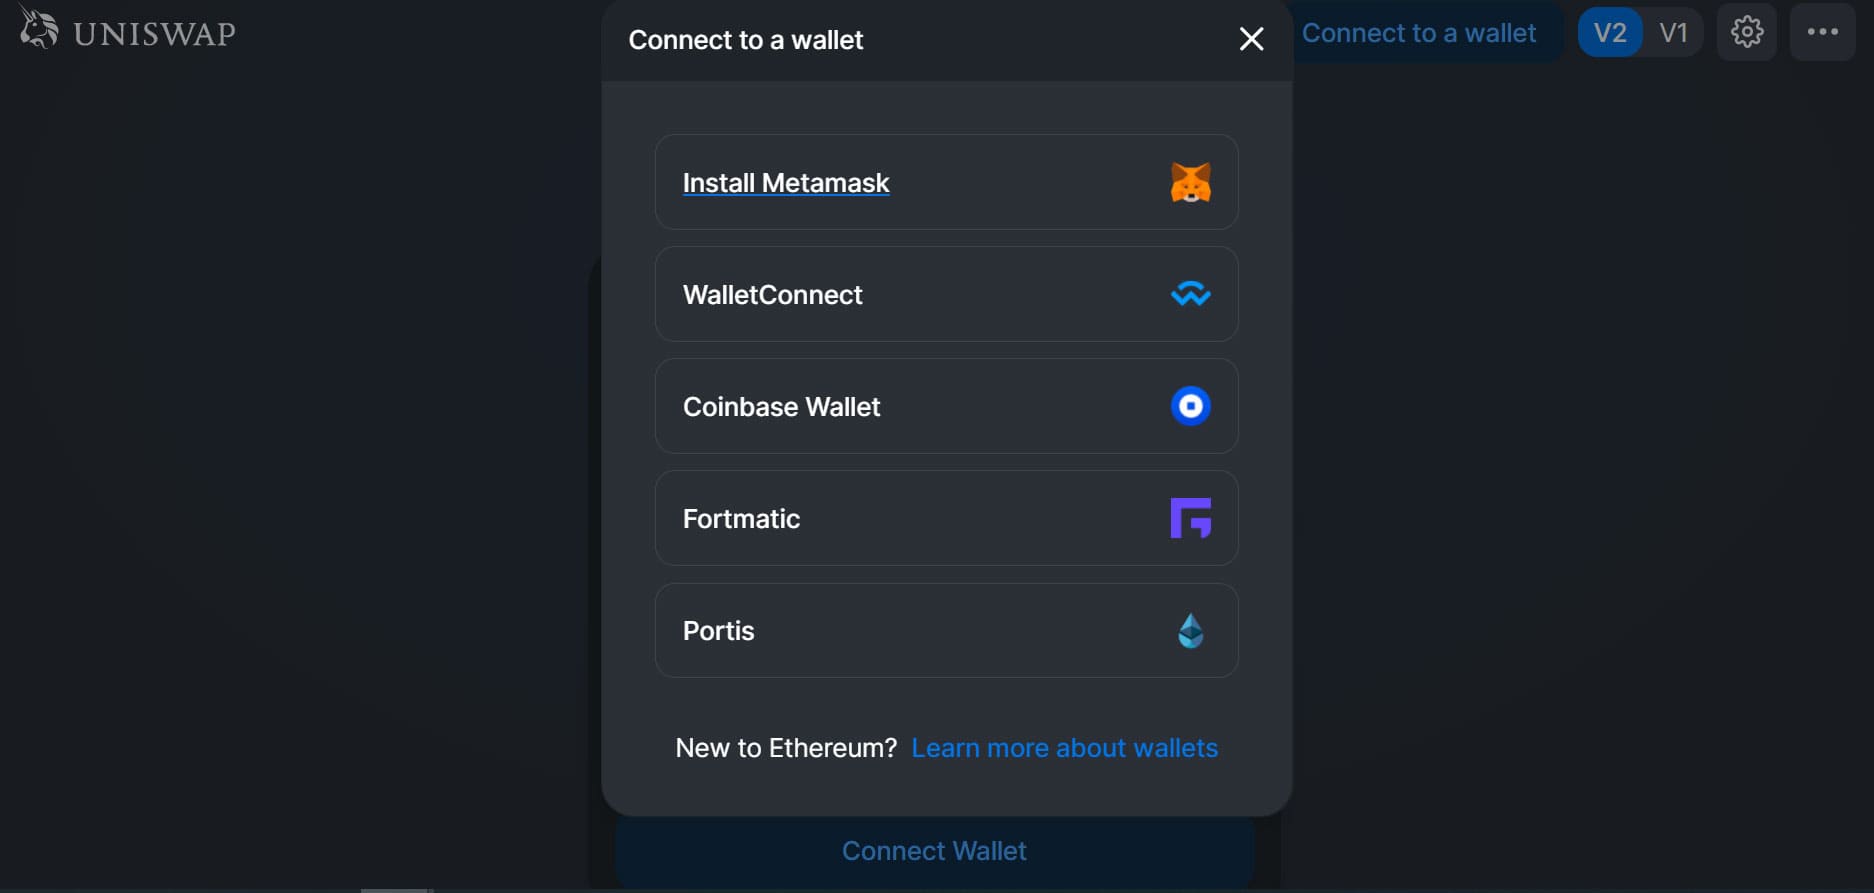 can i connect my crypto.com wallet to uniswap